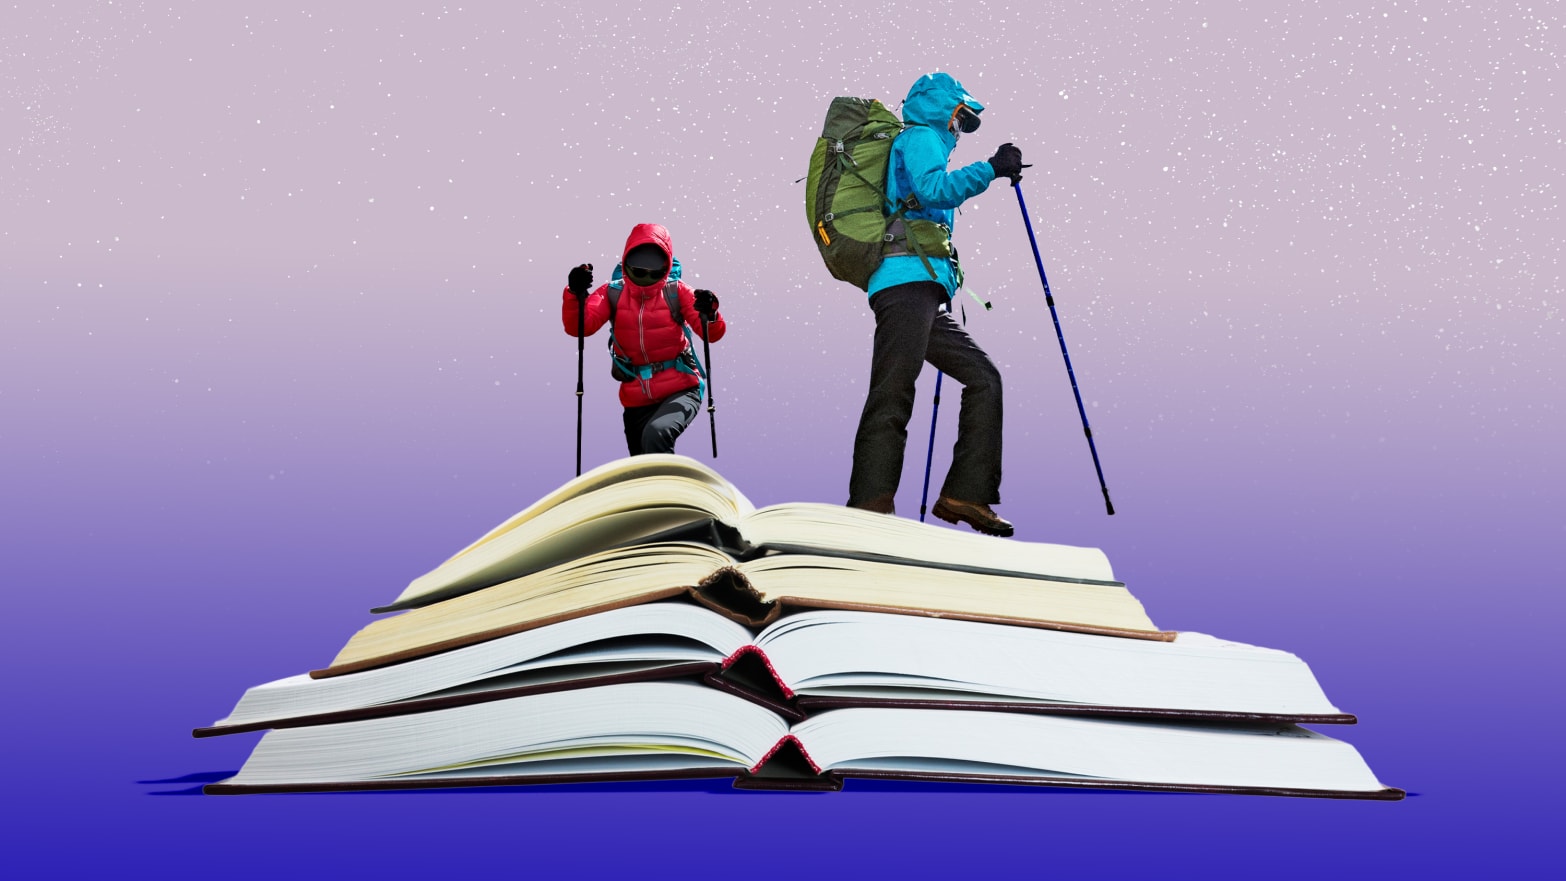 A photo illustration of mountain hikers climbing on open books.